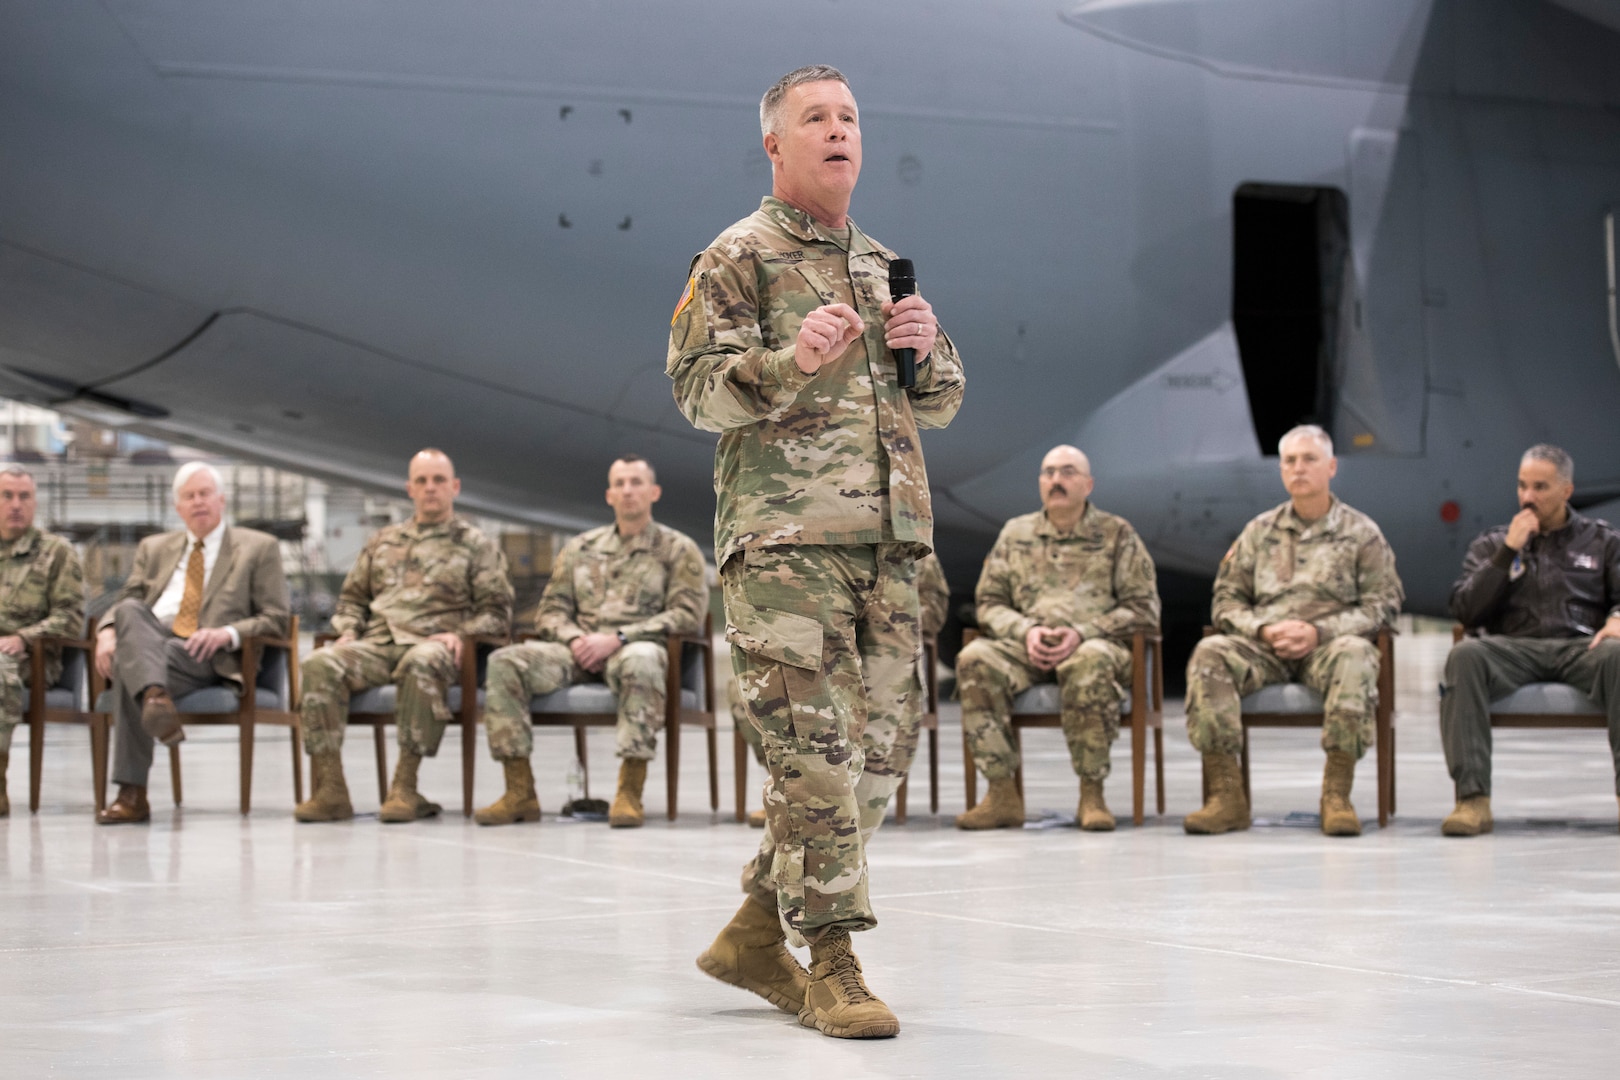 Maj. Gen. James Hoyer, Adjutant General of the West Virginia National Guard, speaks to Soldiers and family members of the 157th Military Police Company during a deployment ceremony held Dec. 3, 2019, at the 167th Airlift Wing in Martinsburg, W.Va. More than 160 Soldiers will be deploying to Guantanamo Bay for nearly a year to support U.S. Southern Command’s high-risk detention operations. (U.S. Air National Guard photo by Senior Master Sgt. Emily Beightol-Deyerle)